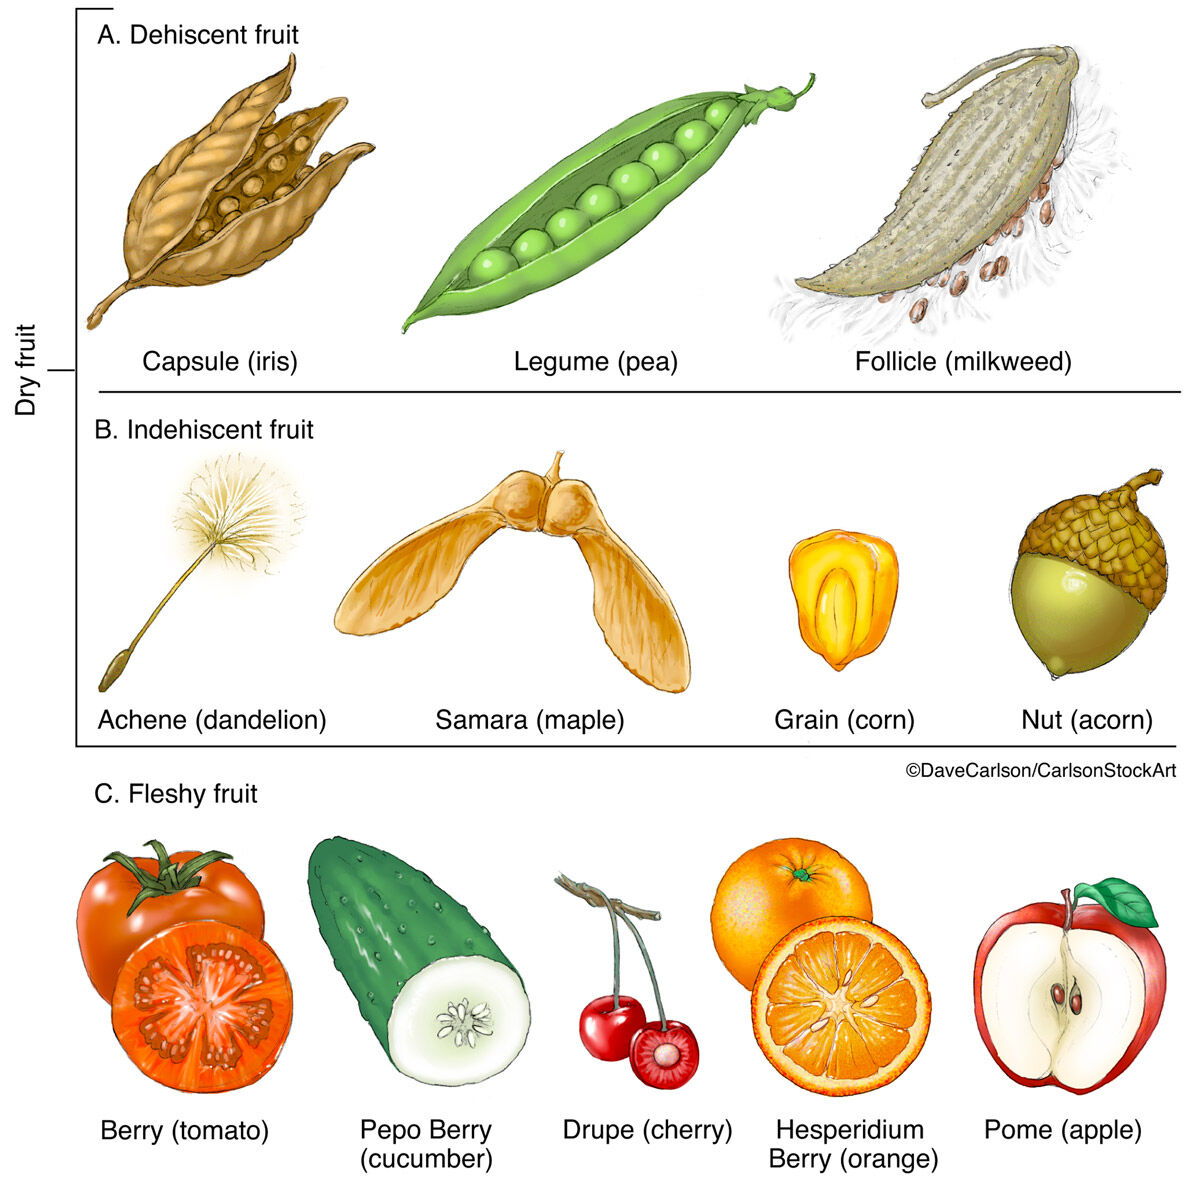 Illustration of the various types of seed-bearing structures that develop from the ovary of a flowering plant.